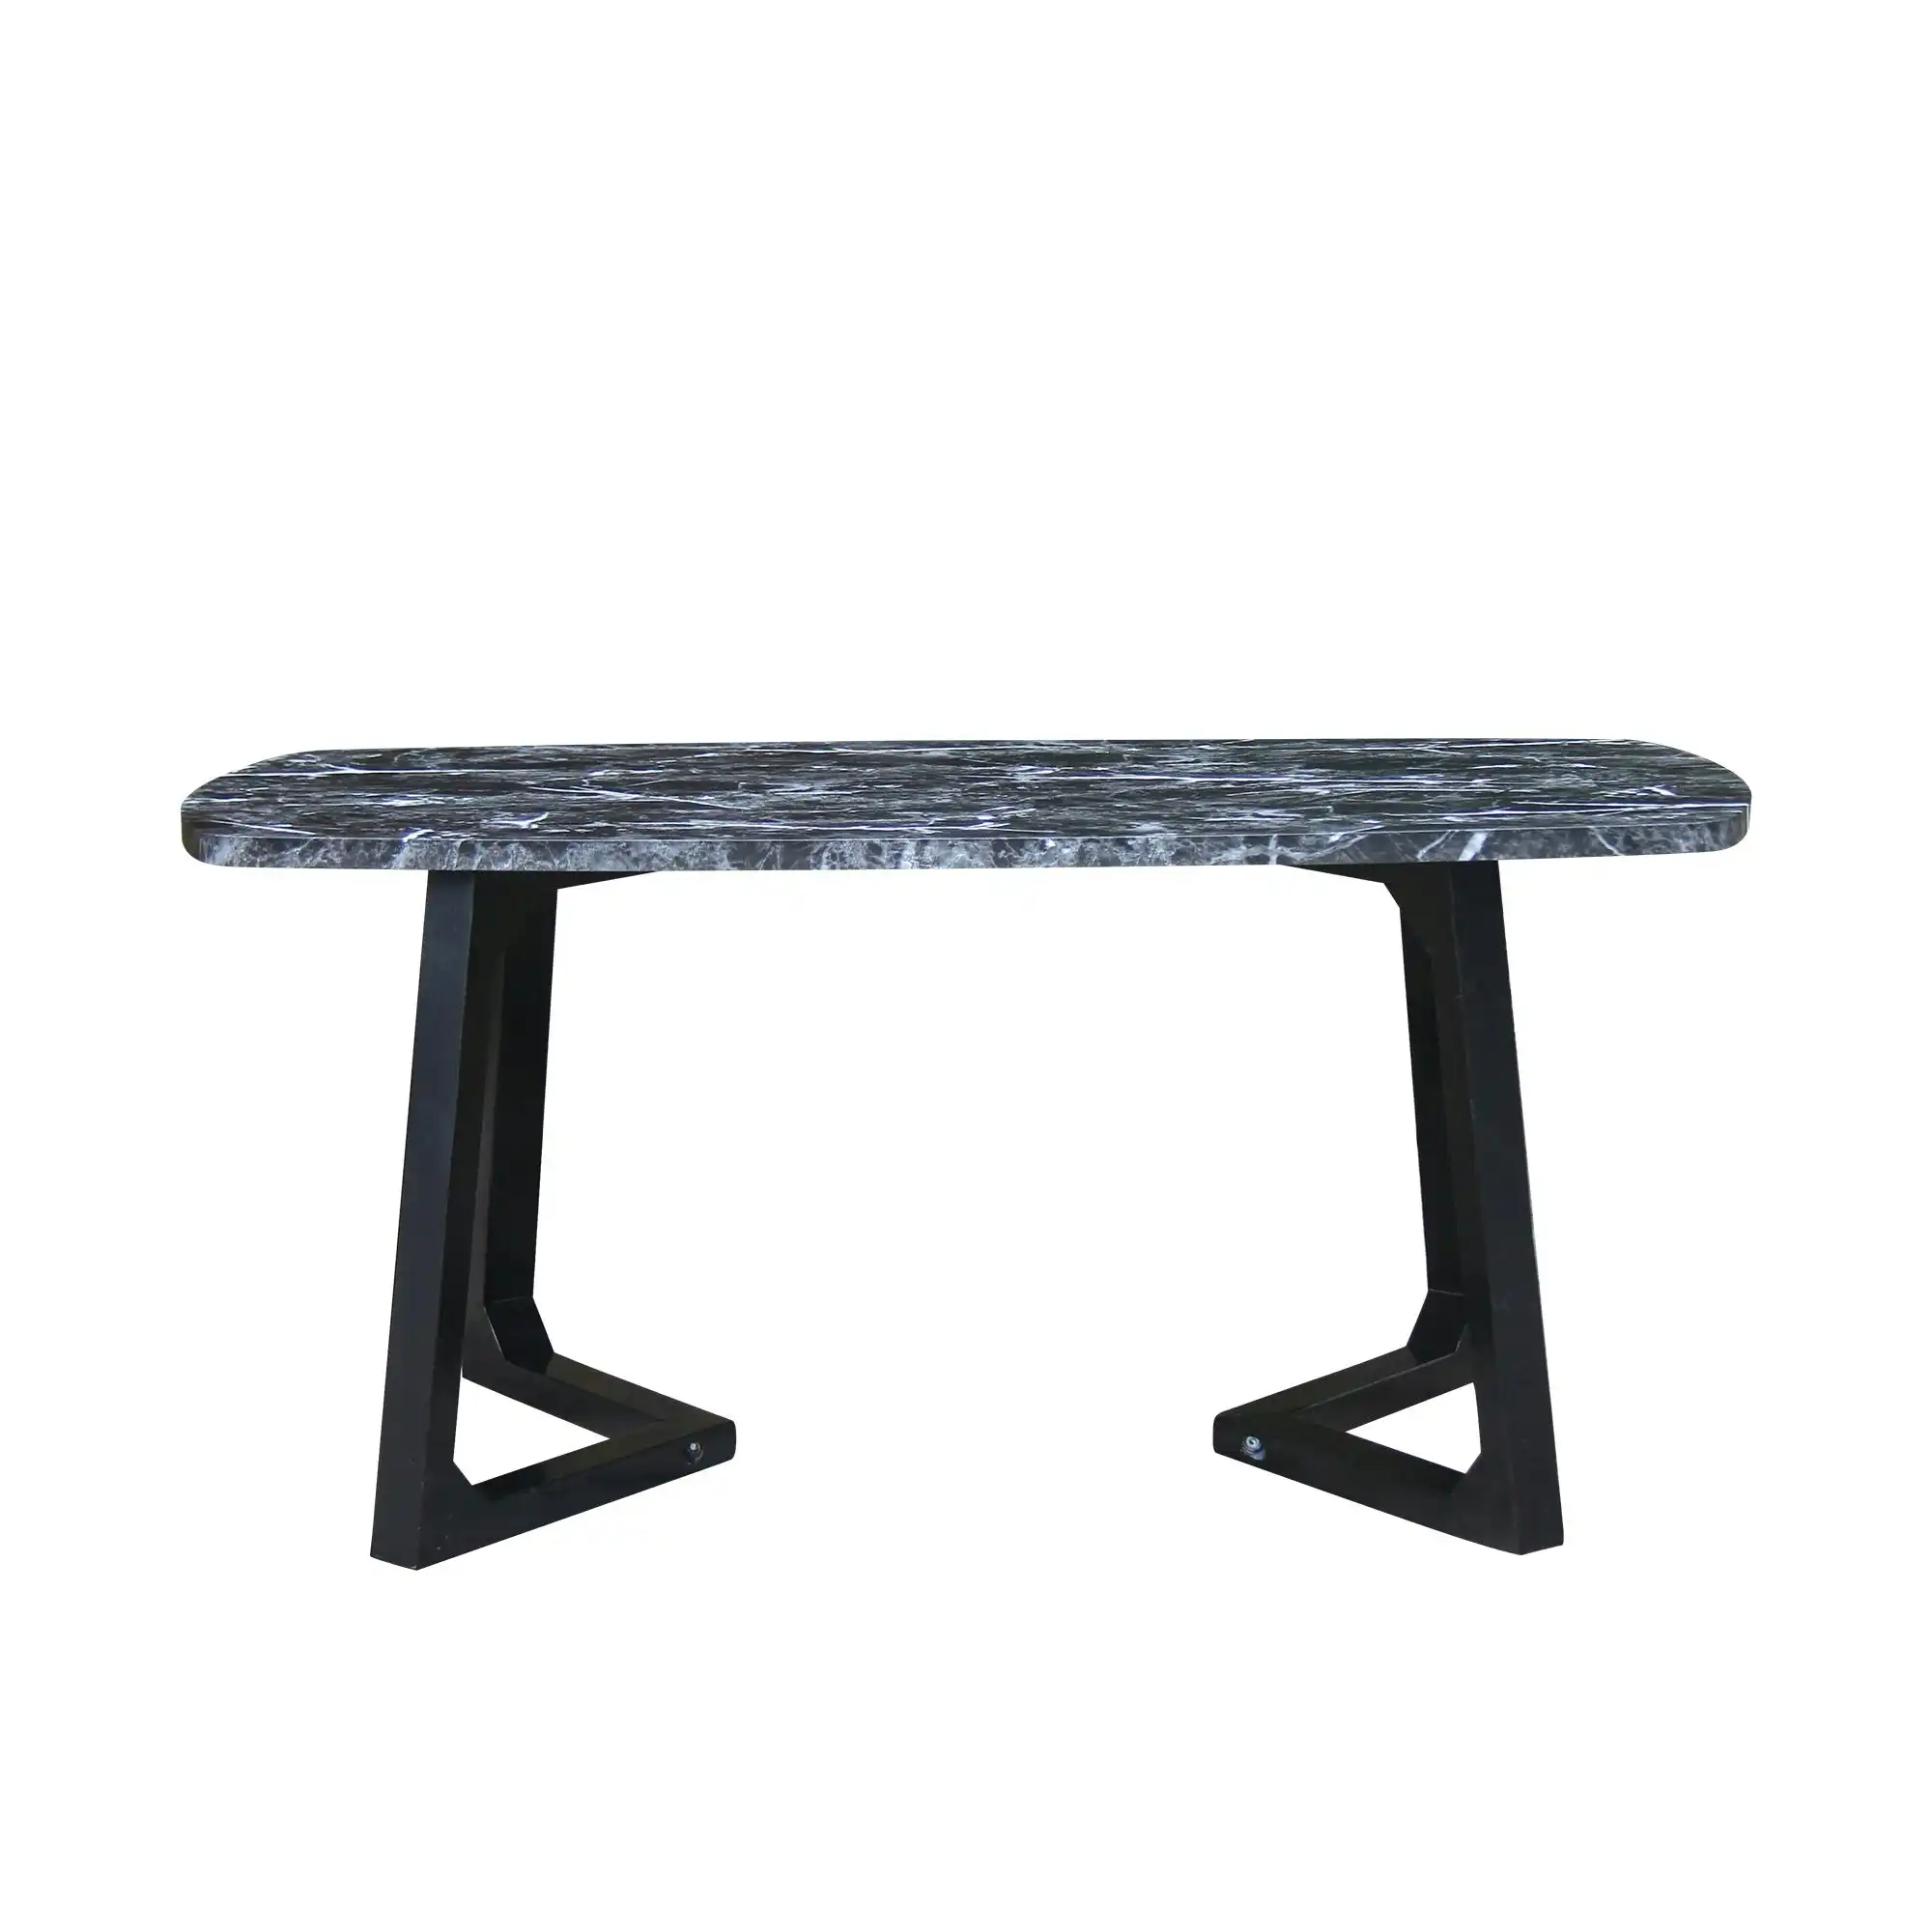 Chotto - Kika Rounded Rectangle Coffee Table - Black Marble Color